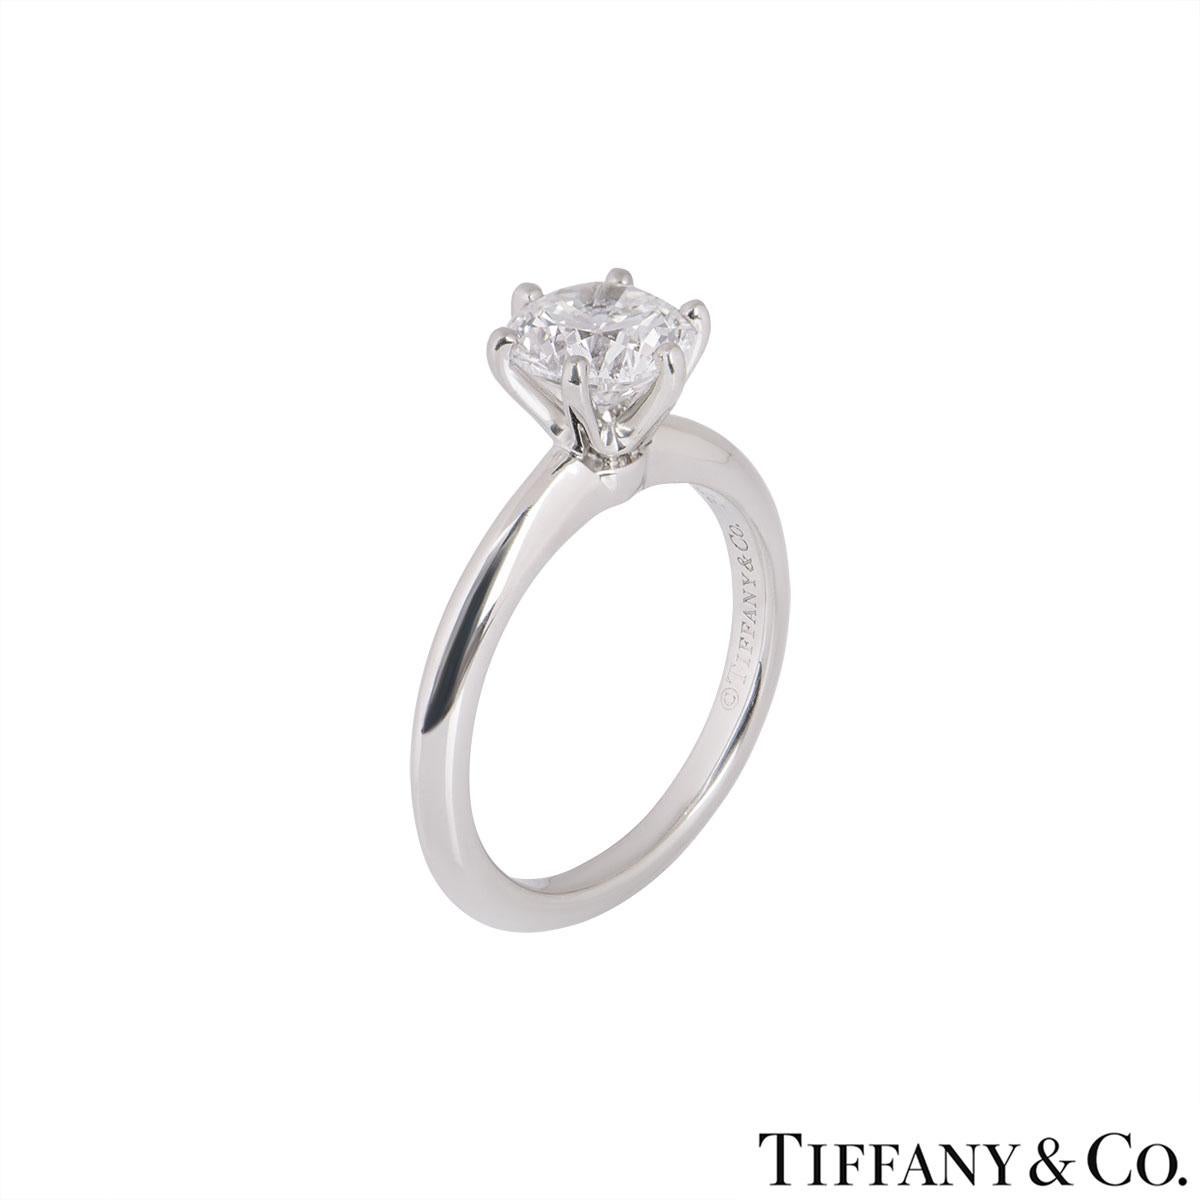 A beautiful platinum diamond ring by Tiffany & Co. from the Setting collection. The ring comprises of a round brilliant cut diamond in a 6 claw setting with a weight of 1.24ct, G colour and VS1 clarity. The diamond scores an excellent rating in all